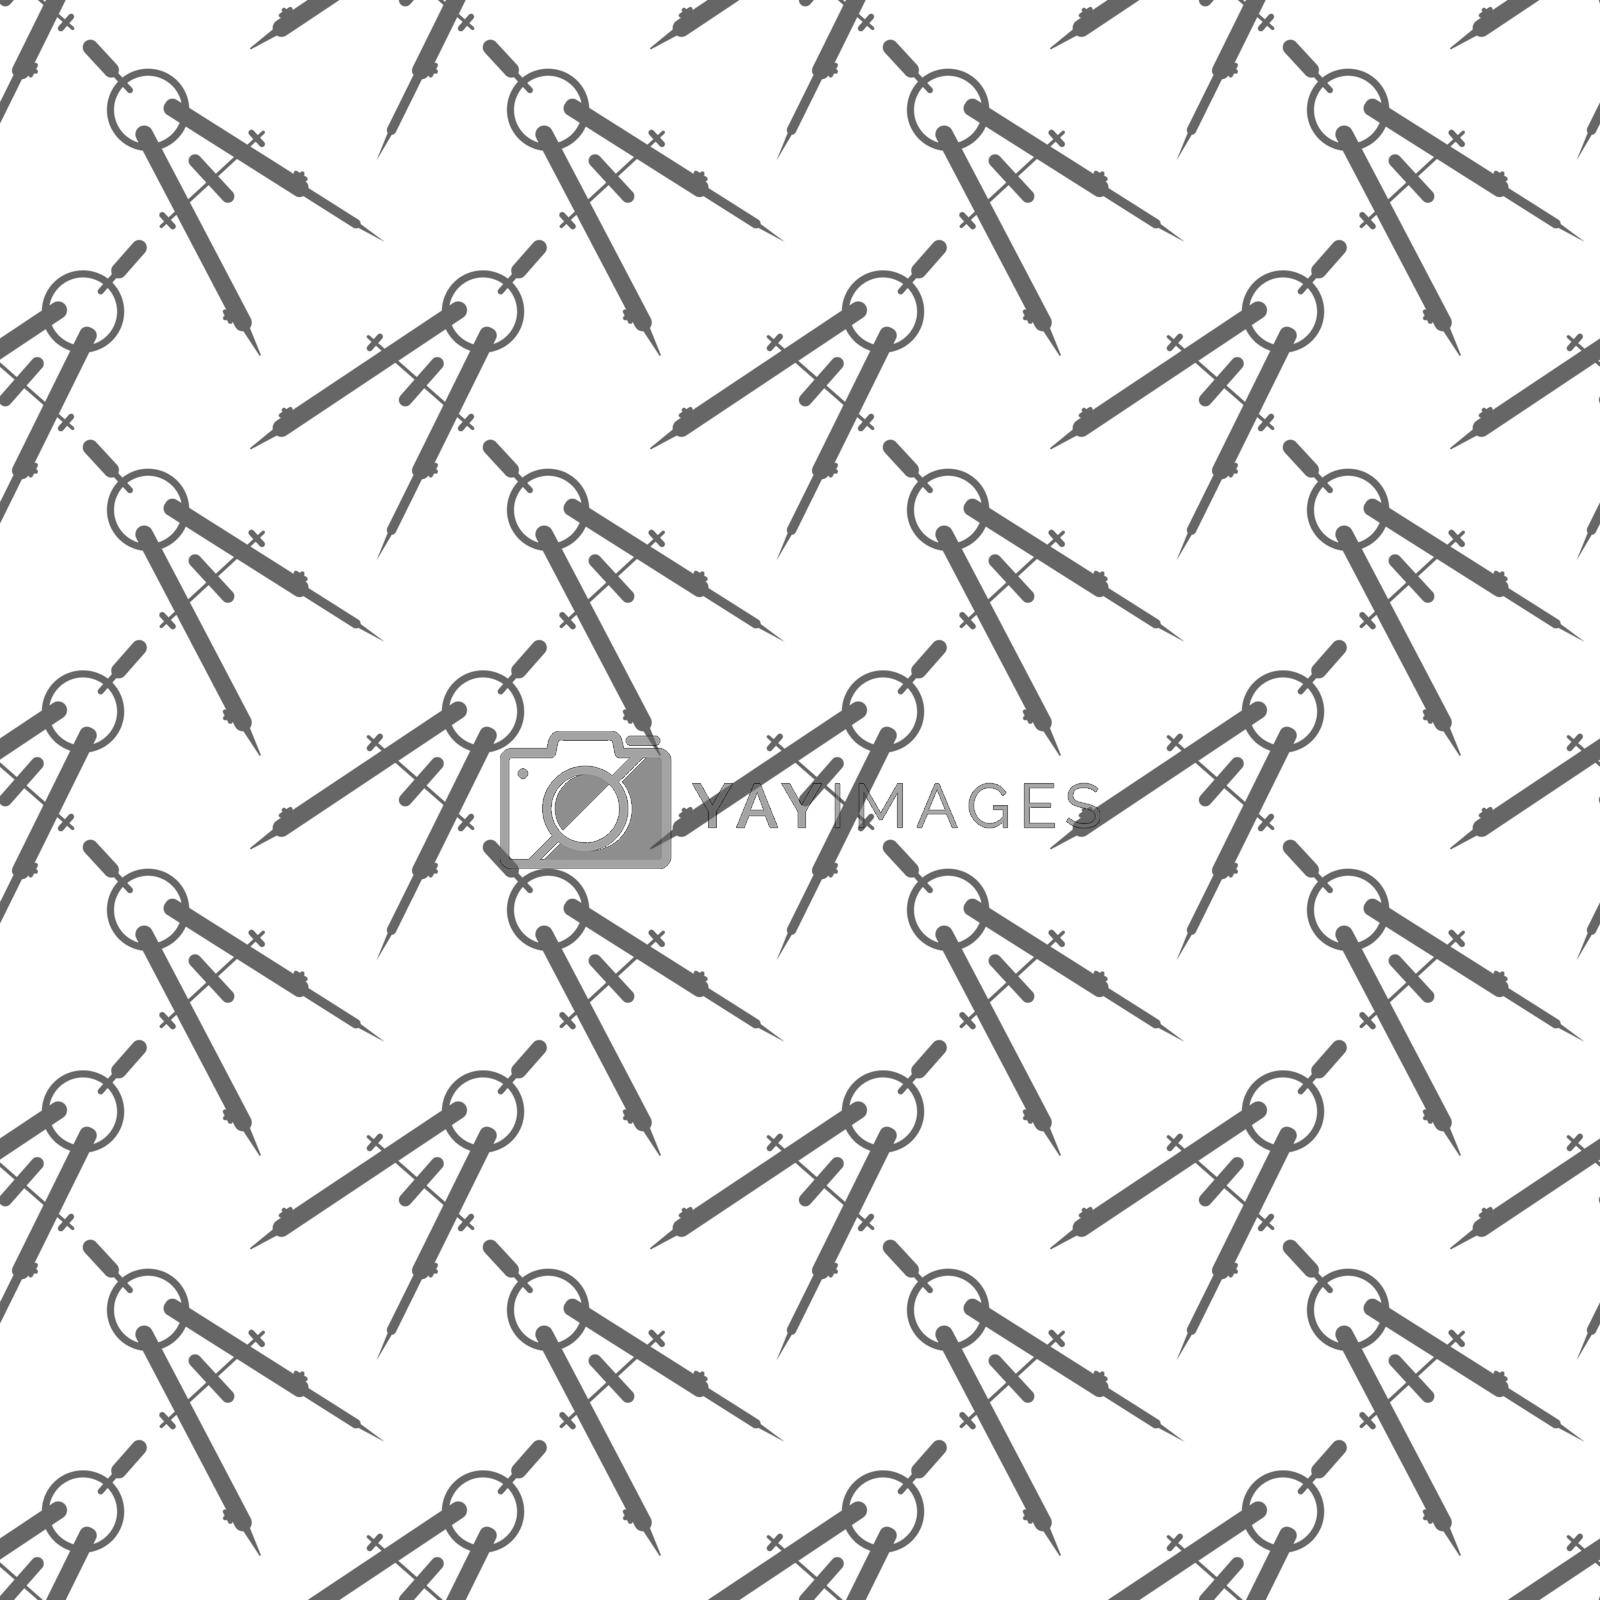 Compasses. Seamless pattern for simple backgrounds. Flat design.